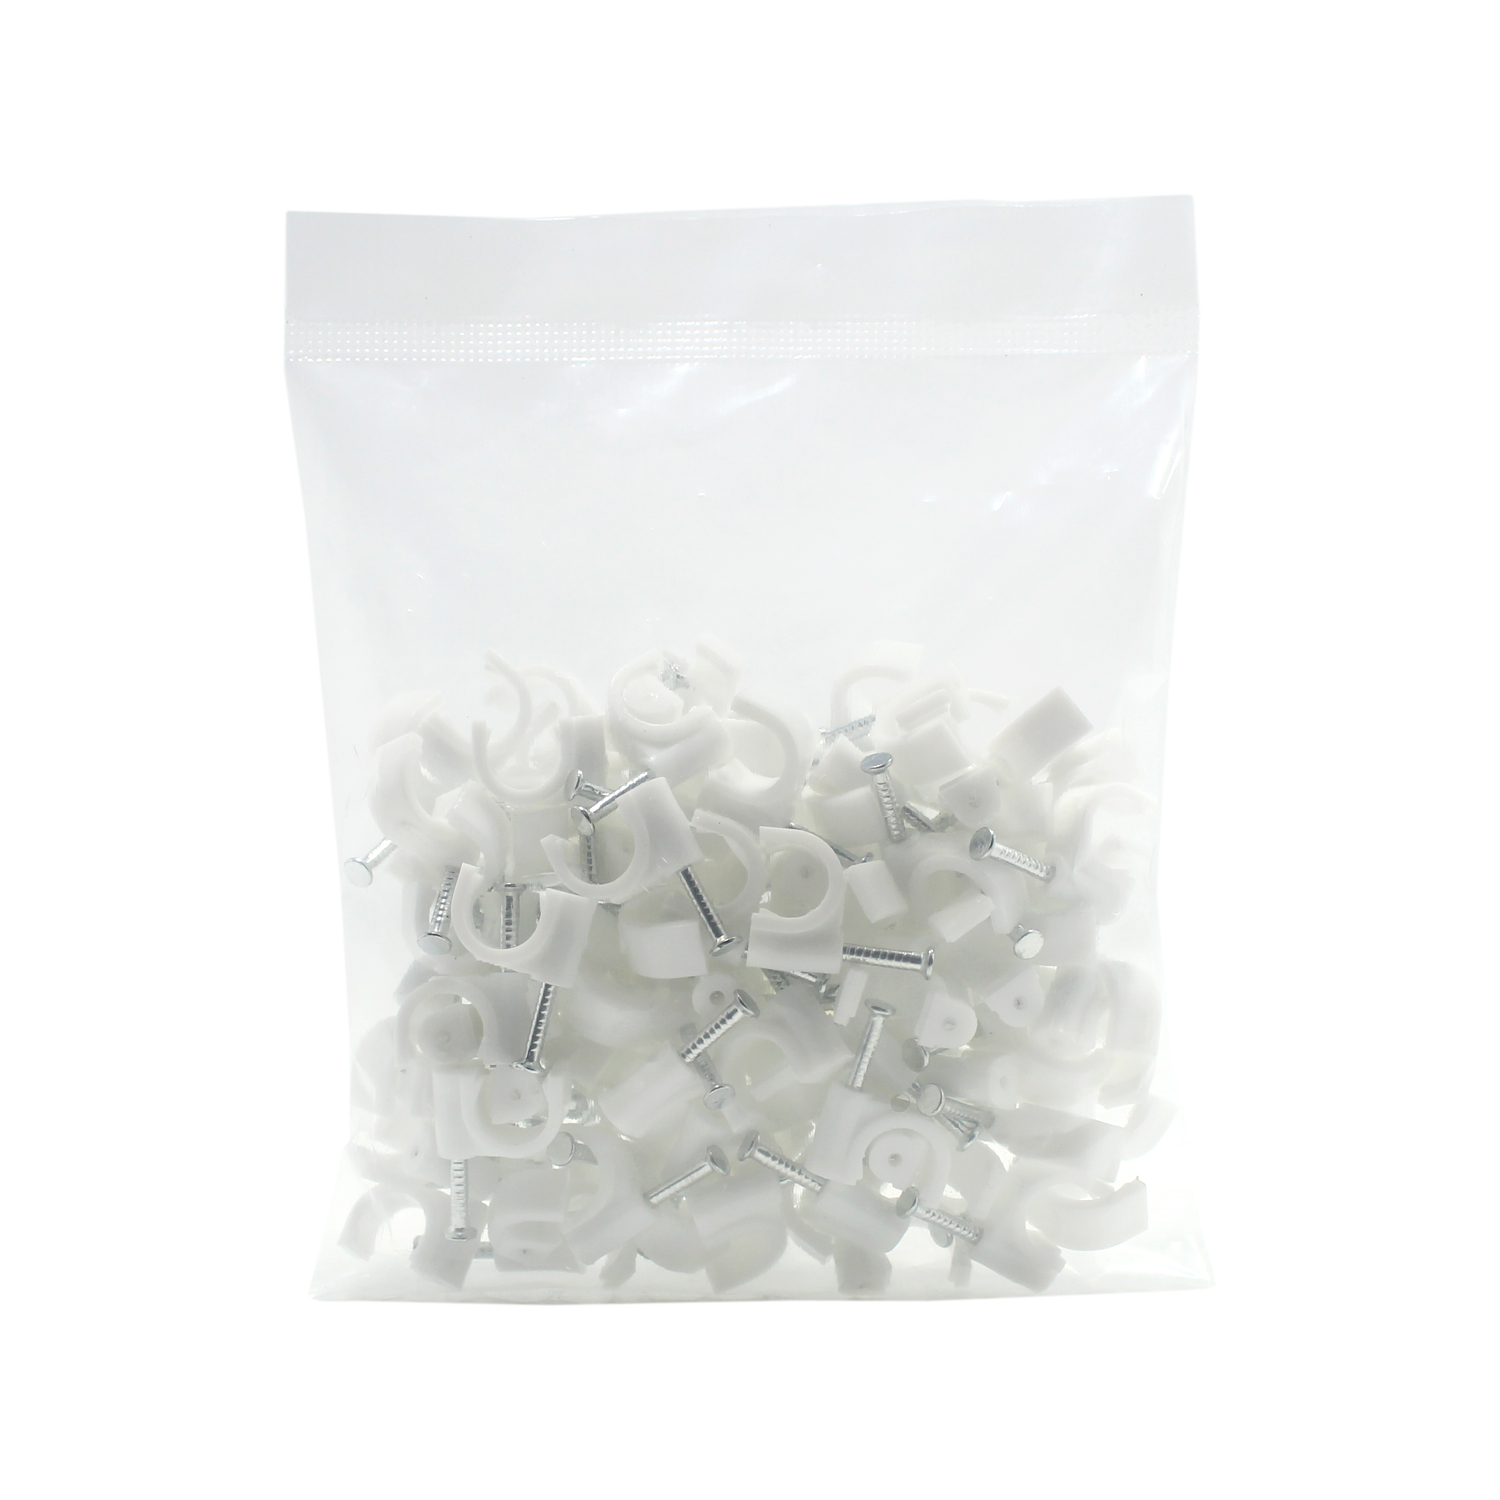 QualGear 8mm Cable Clips, White, 100 Pack, CC8-W-100-P